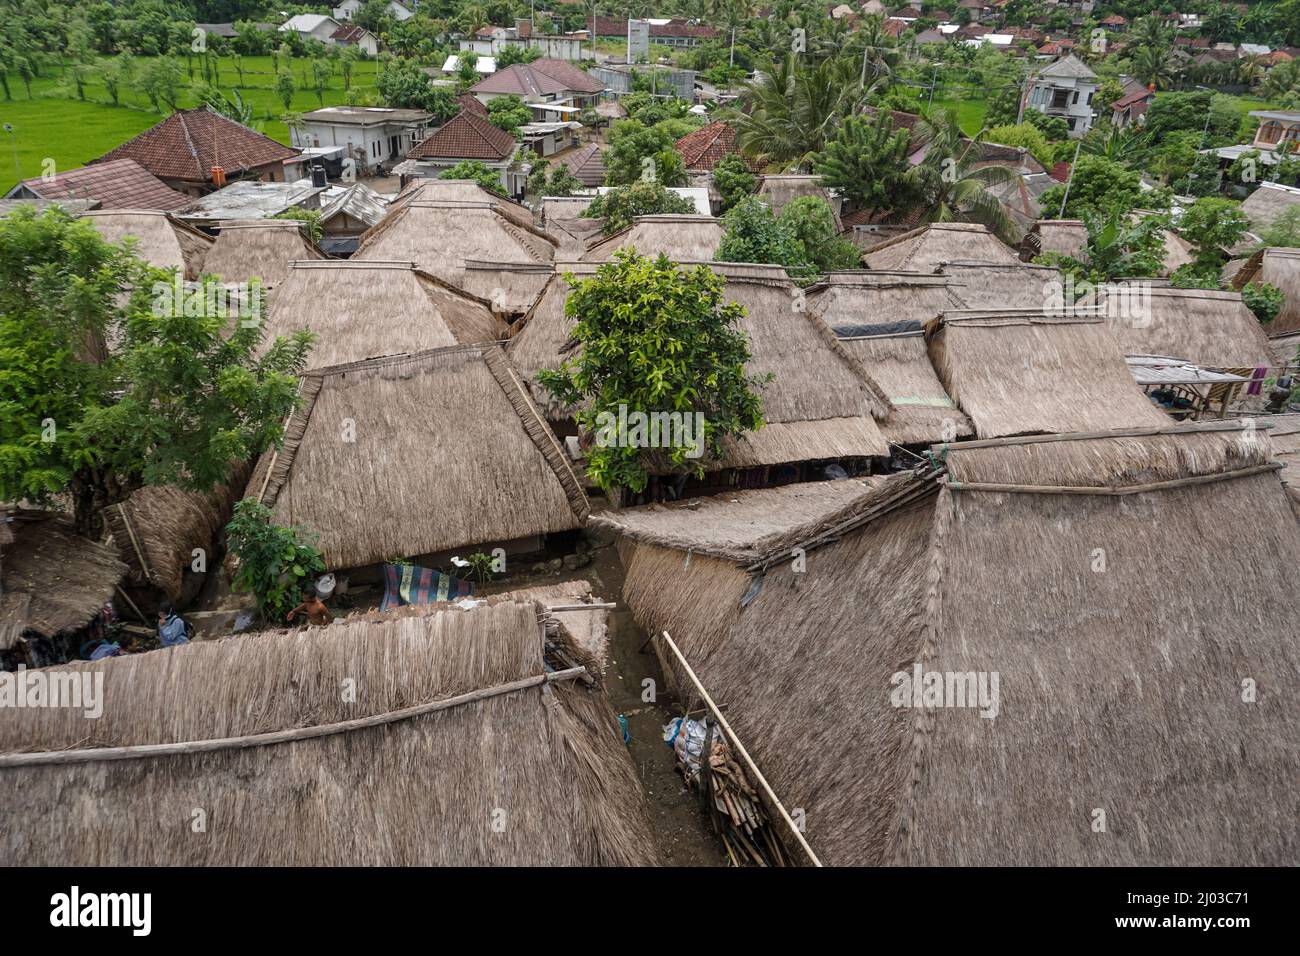 Some houses made of bamboo and pottery made by villagers Stock Photo